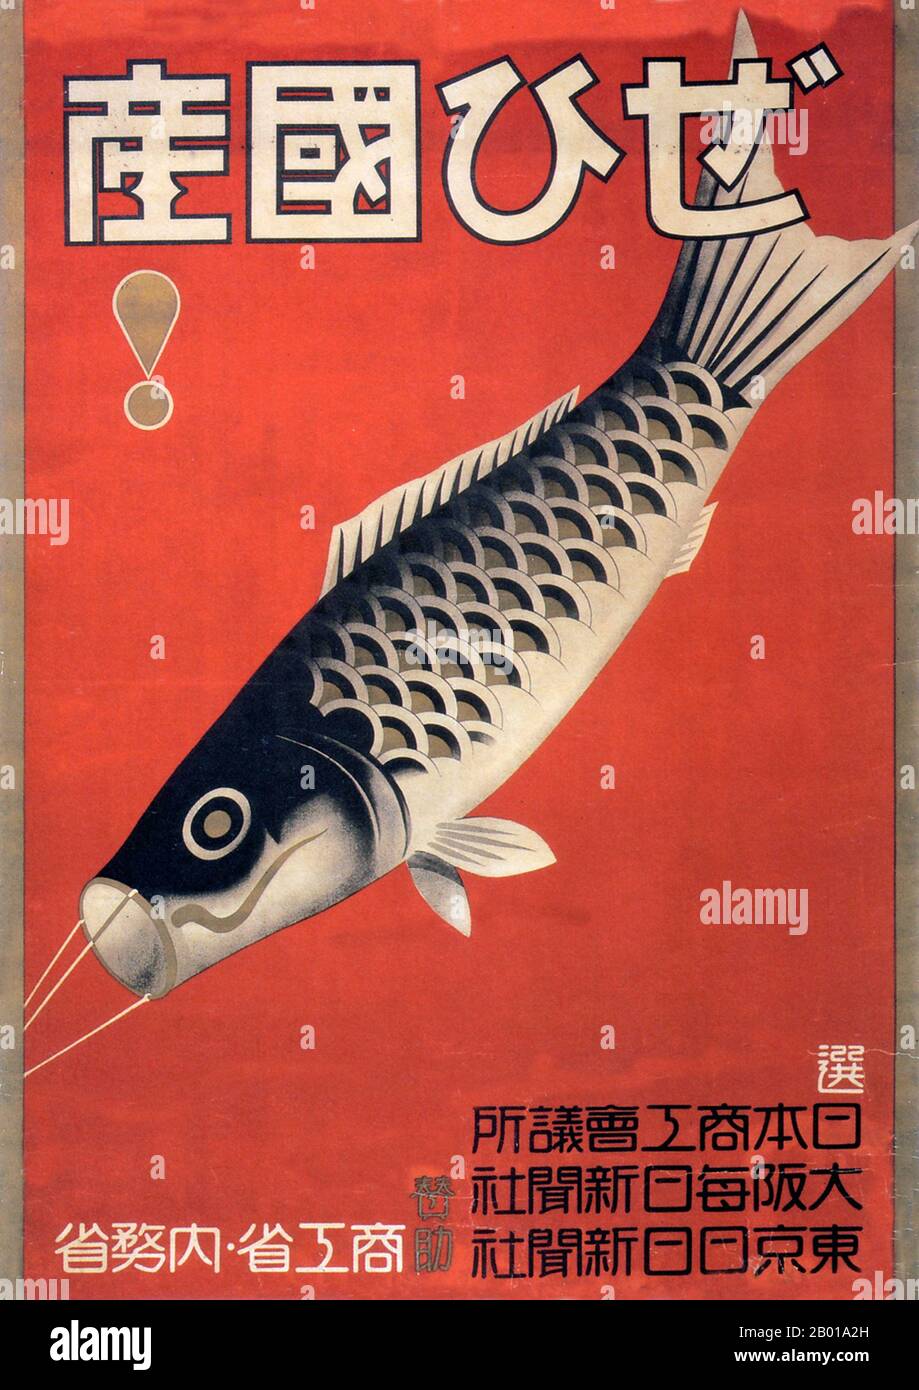 Japan:  Advertising poster urges Japanese people to buy domestic produce, c. 1930.  Between the end of the First World War in 1918 and the outbreak of the Pacific War in 1941, Japanese graphic design as represented in advertising posters, magazine covers and book covers underwent a series of changes characterised by increasing Western influence, a growing middle class, industrialisation and militarisation, as well as (initially) left wing political ideals and (subsequently) right wing nationalism and the influence of European Fascist art forms. Stock Photo